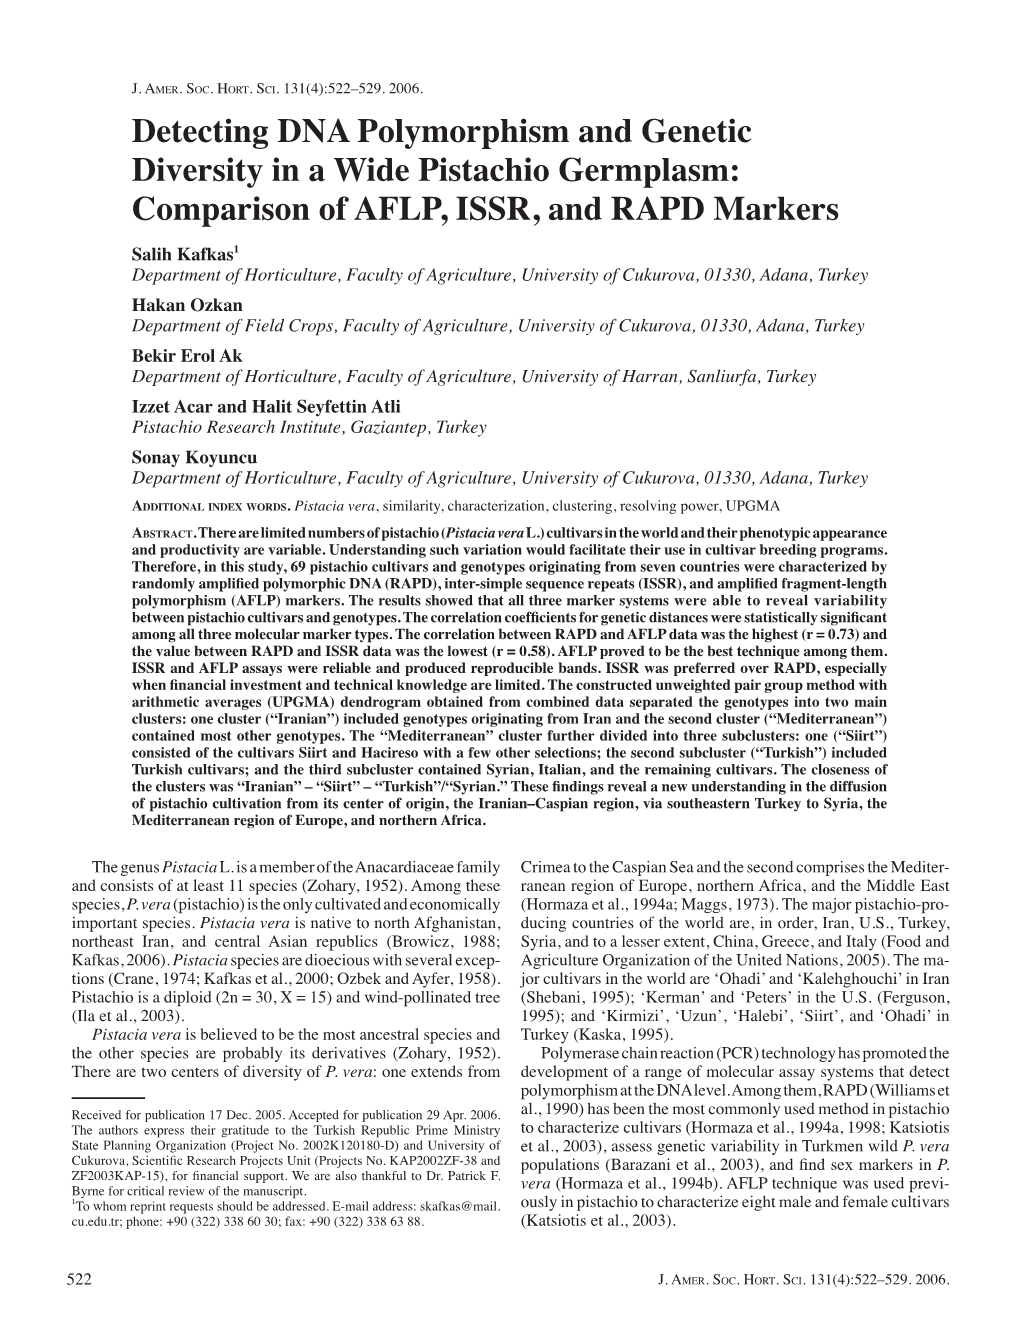 Detecting DNA Polymorphism and Genetic Diversity in a Wide Pistachio Germplasm: Comparison of AFLP, ISSR, and RAPD Markers